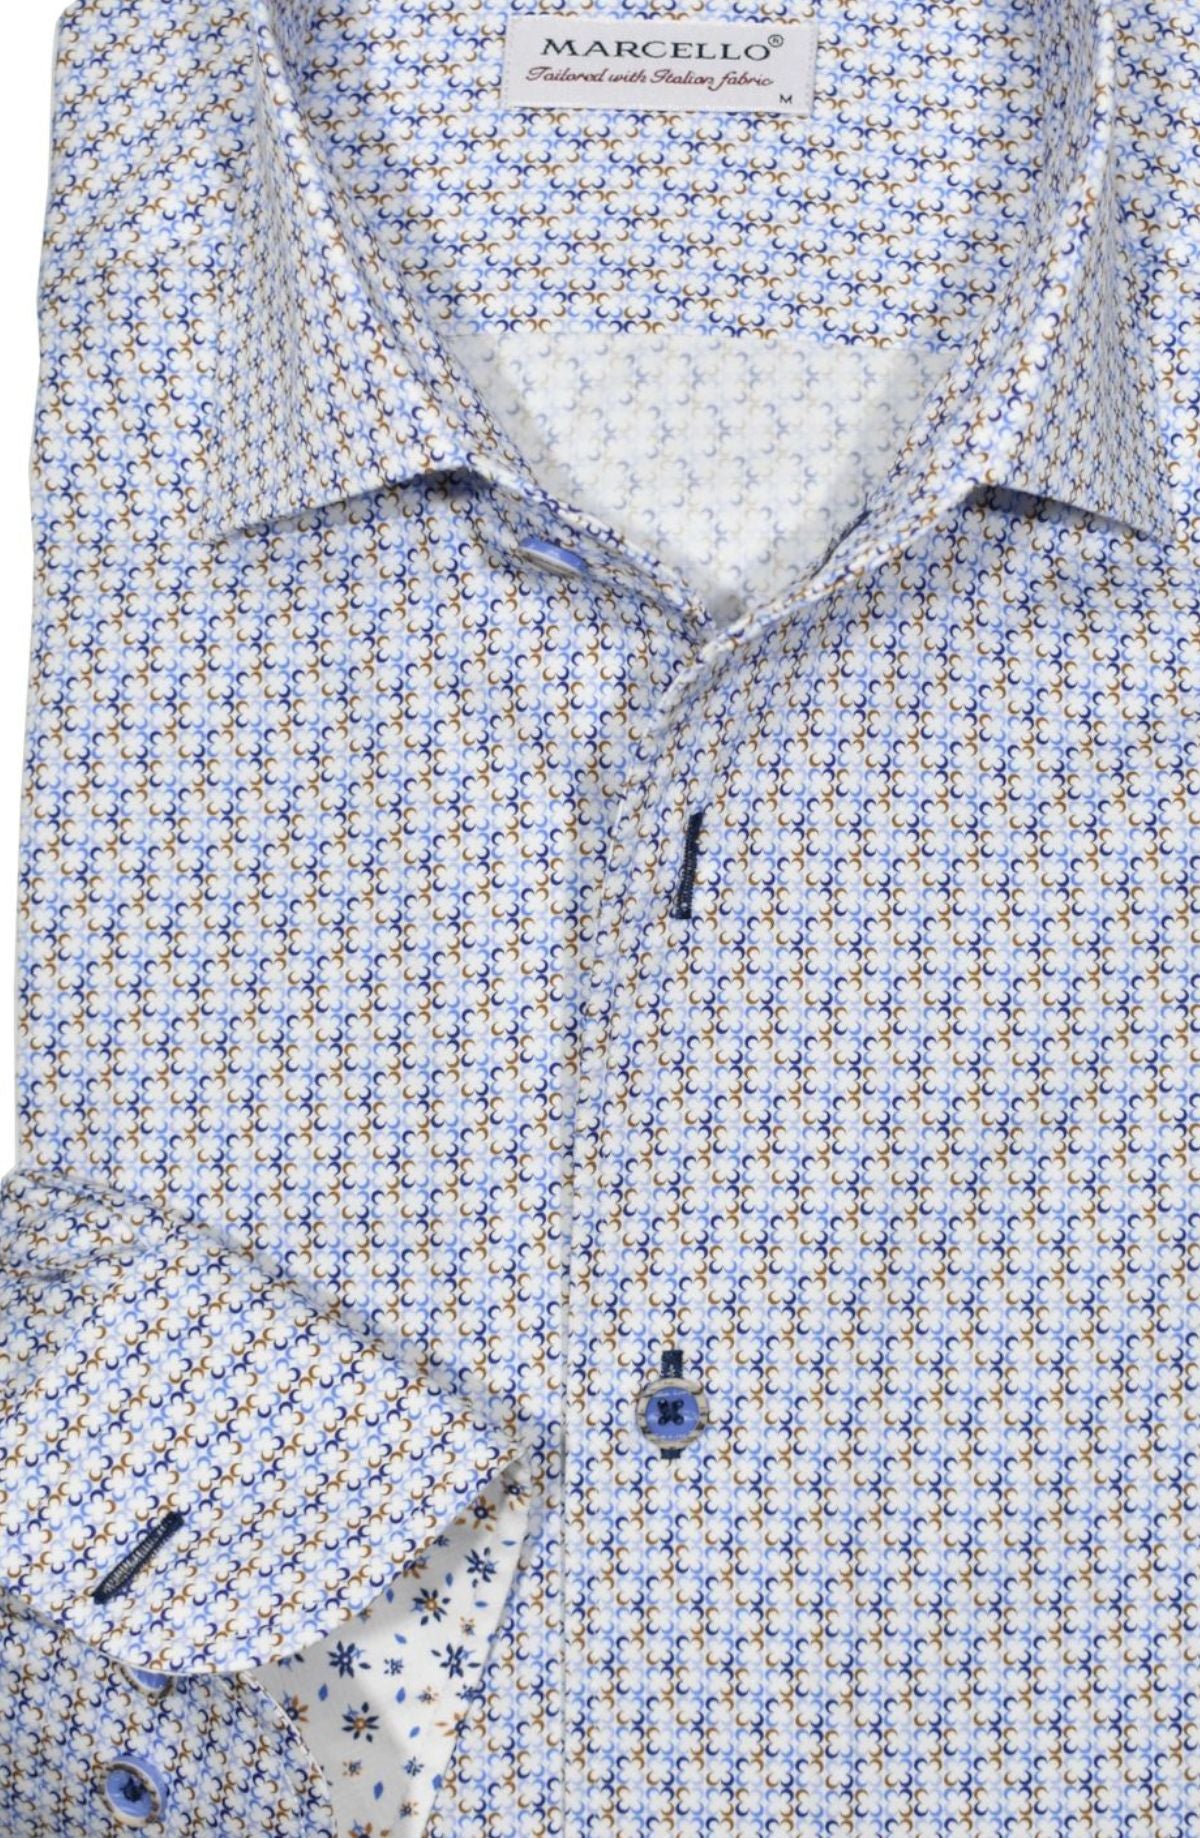 The Marcello exclusive design is like no other, creating a dignified look with a collar that stands perfectly whether worn alone or under a sport coat. Its unique placket ensures a smooth, crisp appearance. Style W846R